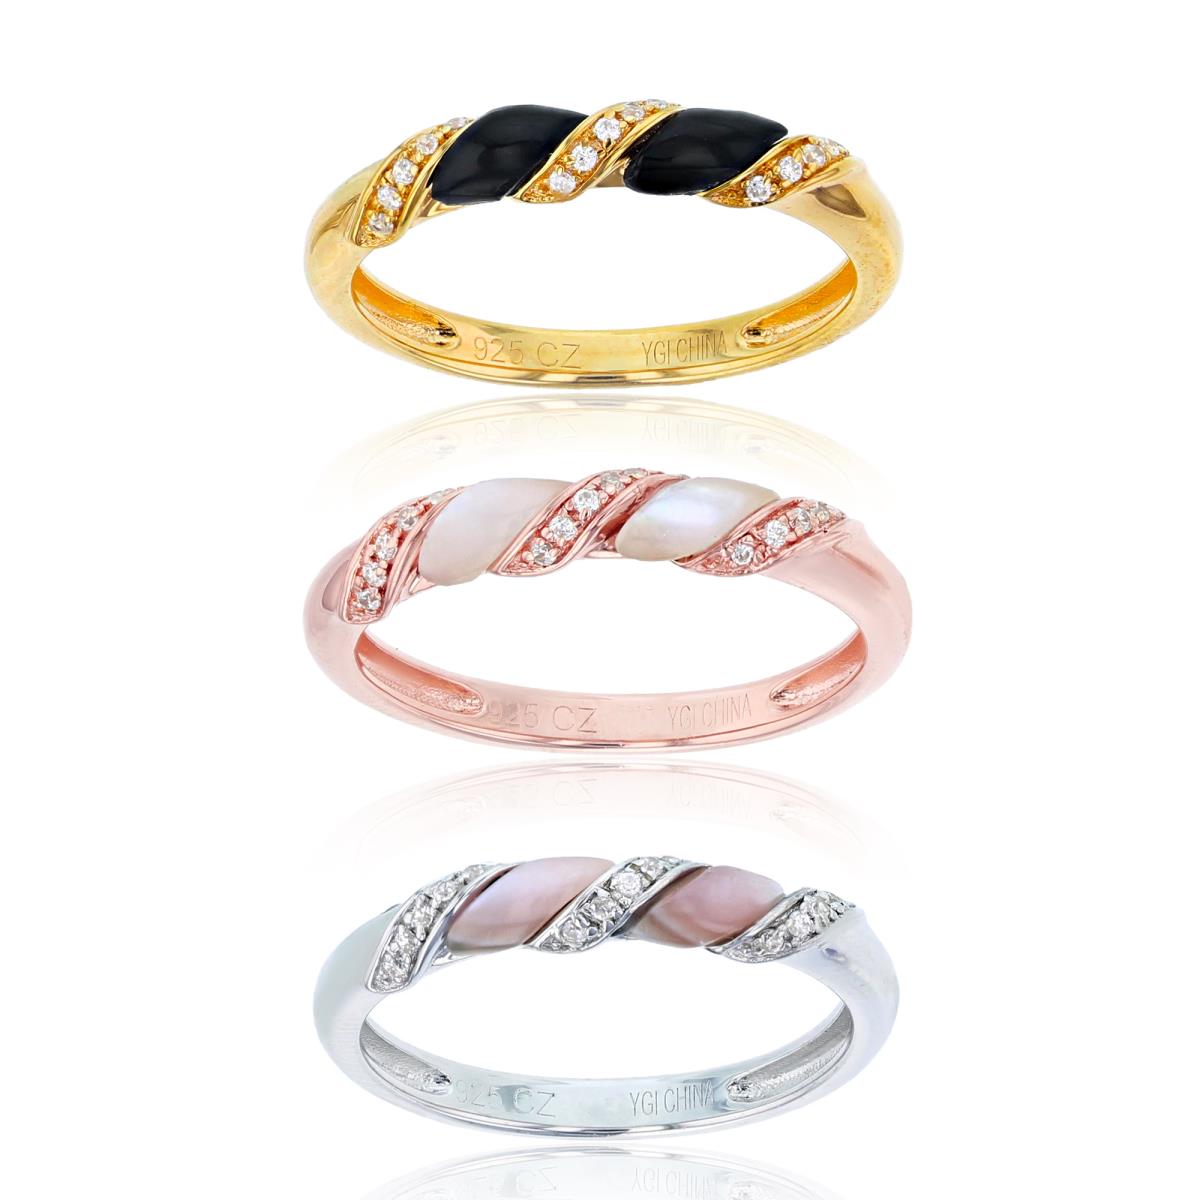 Sterling Silver 1Micron 14K Tricolor Gold 0.14 CTTW Rnd Diam & Onyx/White and Pink Mop 3-Stackable Rings